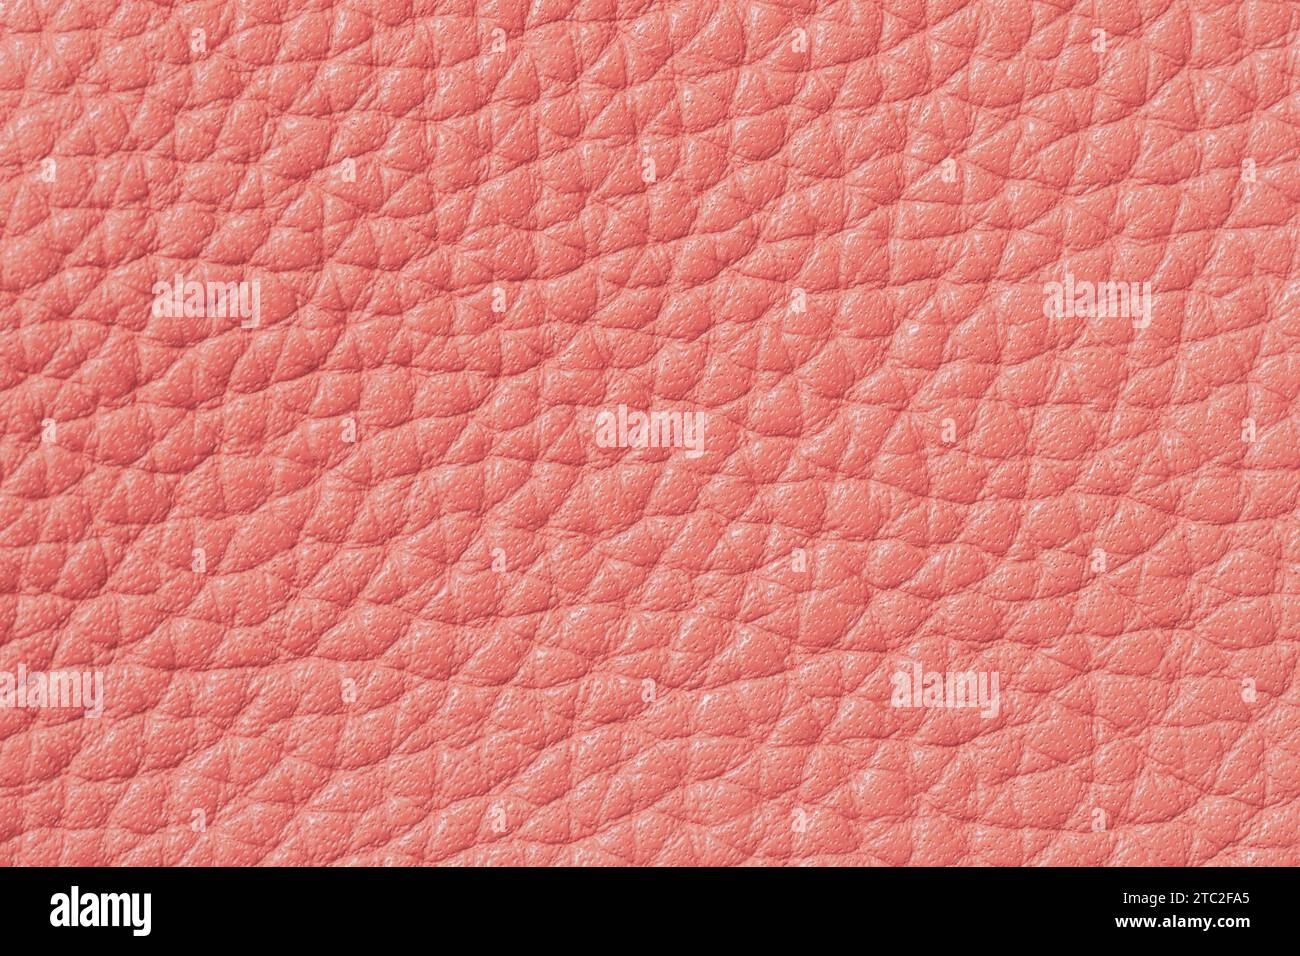 Genuine grainy leather texture closeup, coral peach color, trendy background Stock Photo